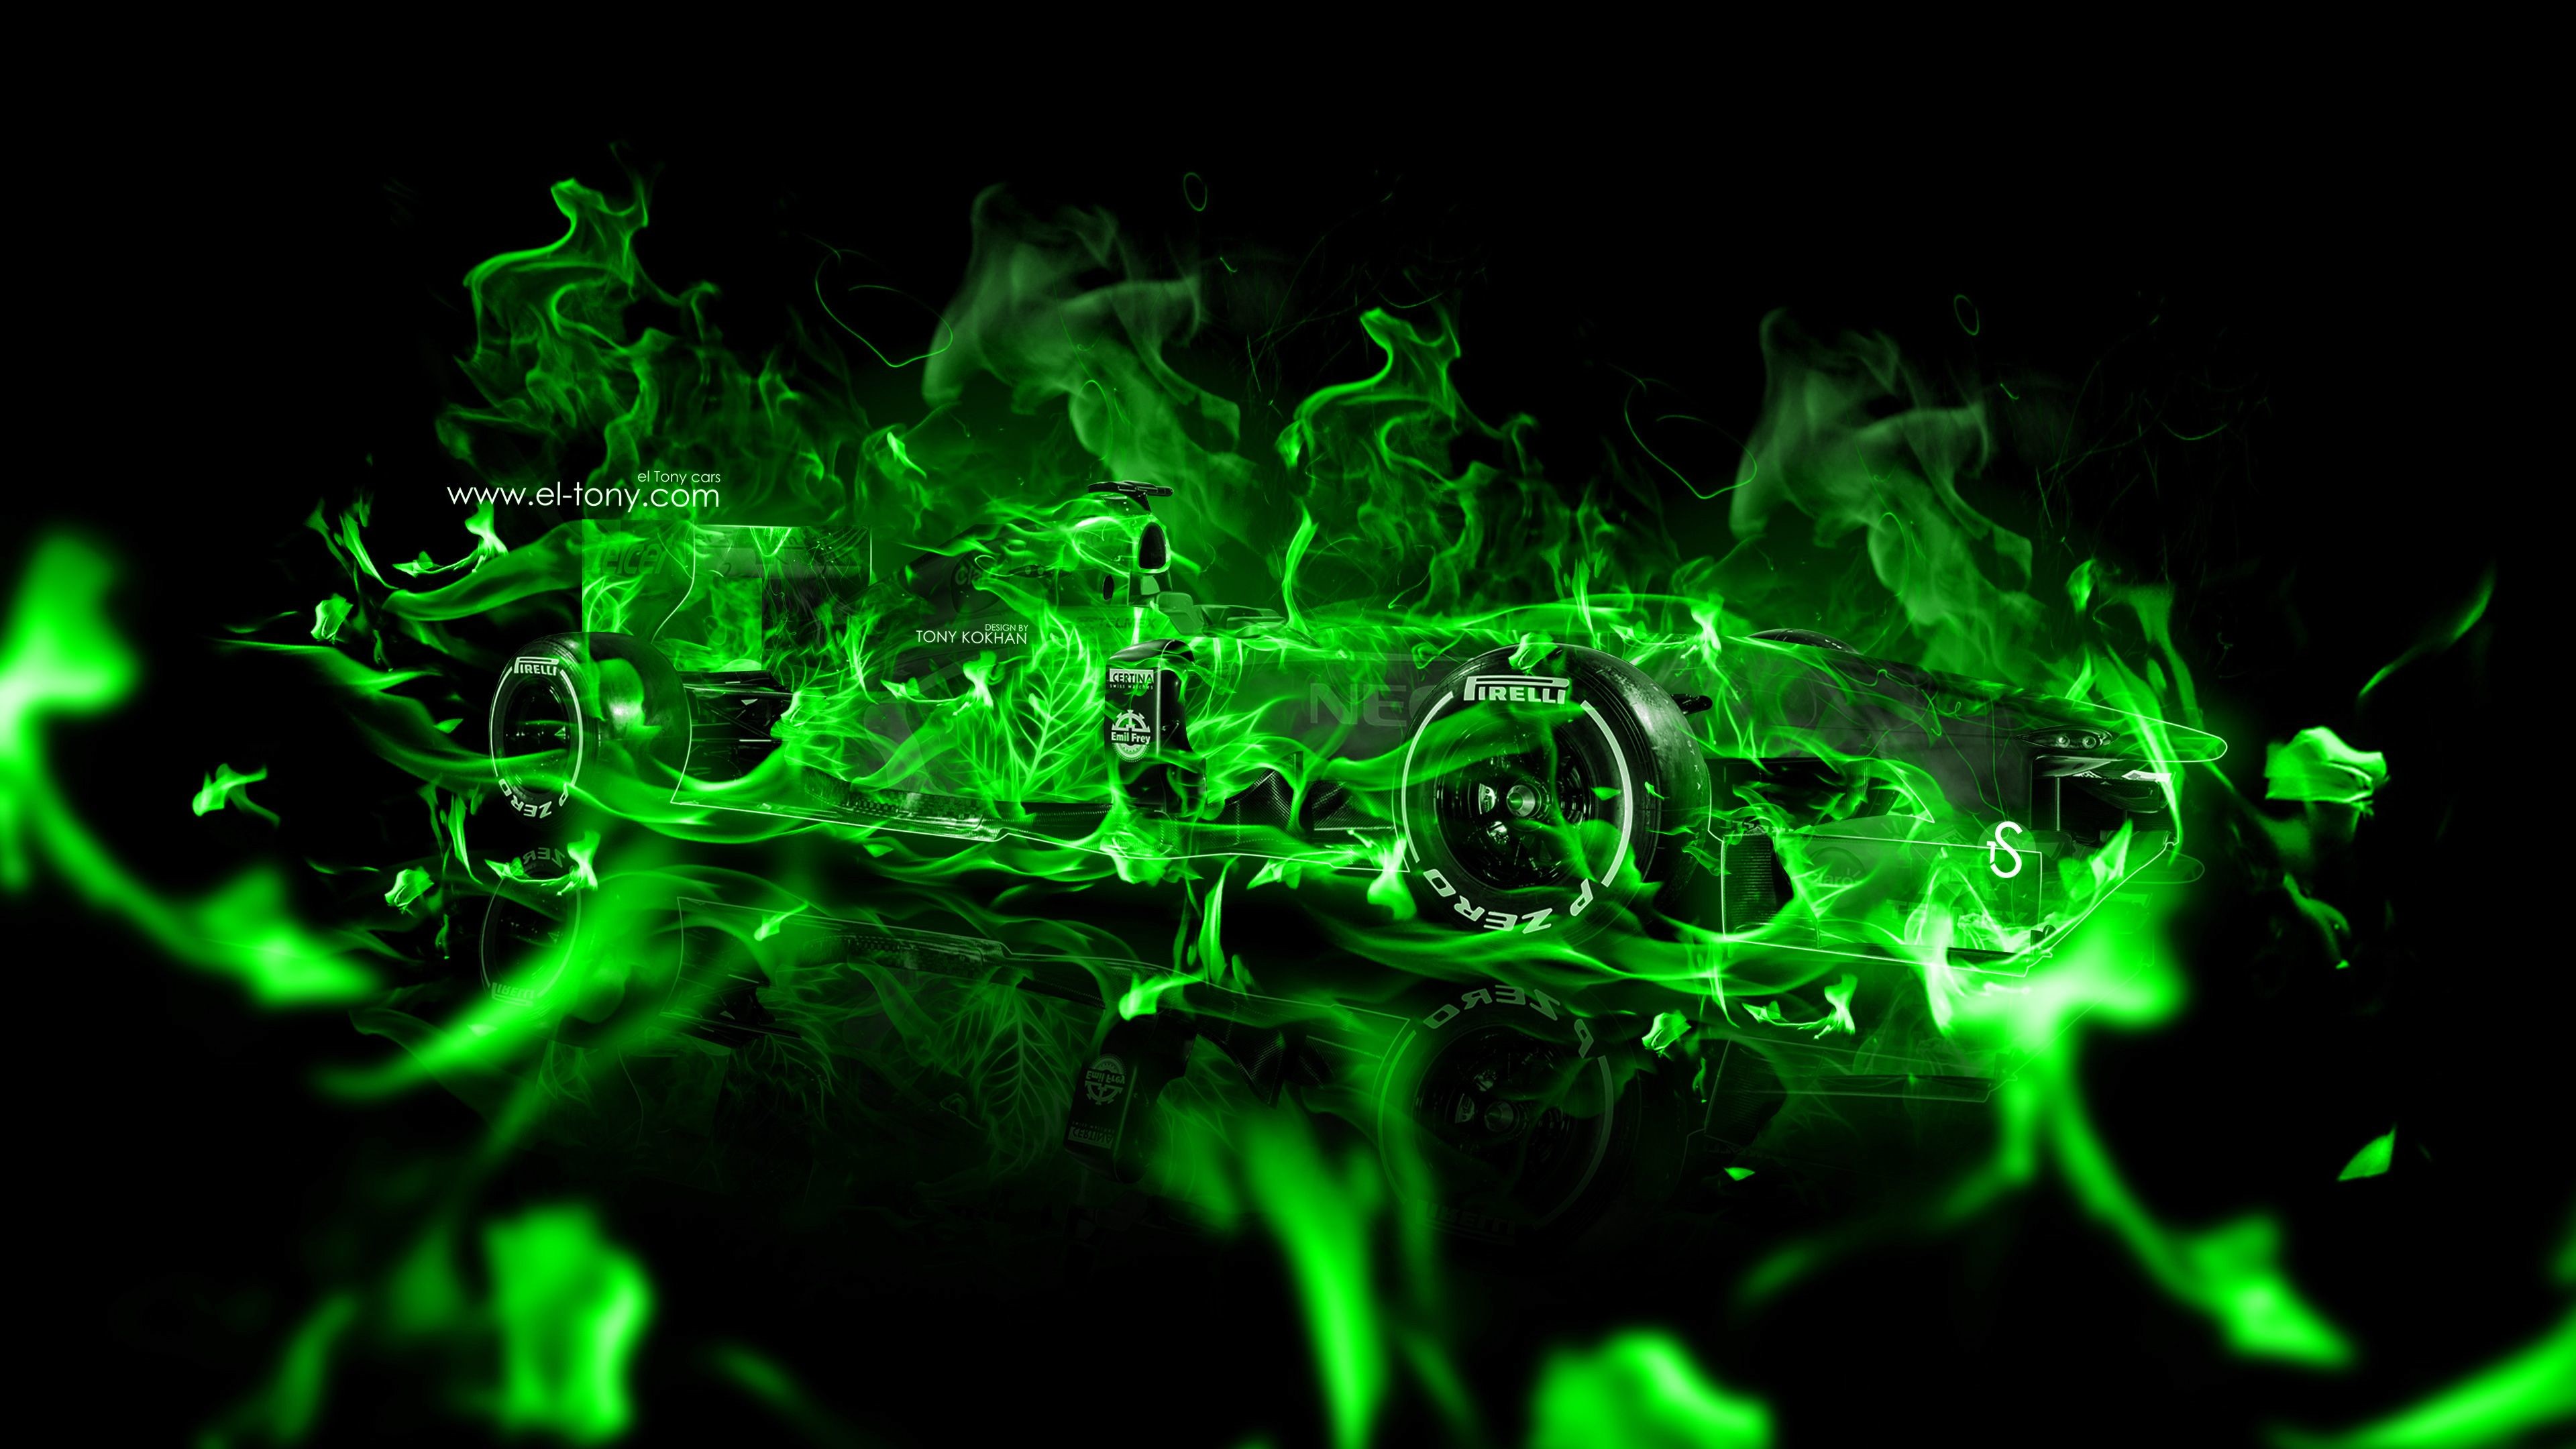 3840x2160 Black Green Wallpapers, 38 High Quality Black Green Wallpapers .